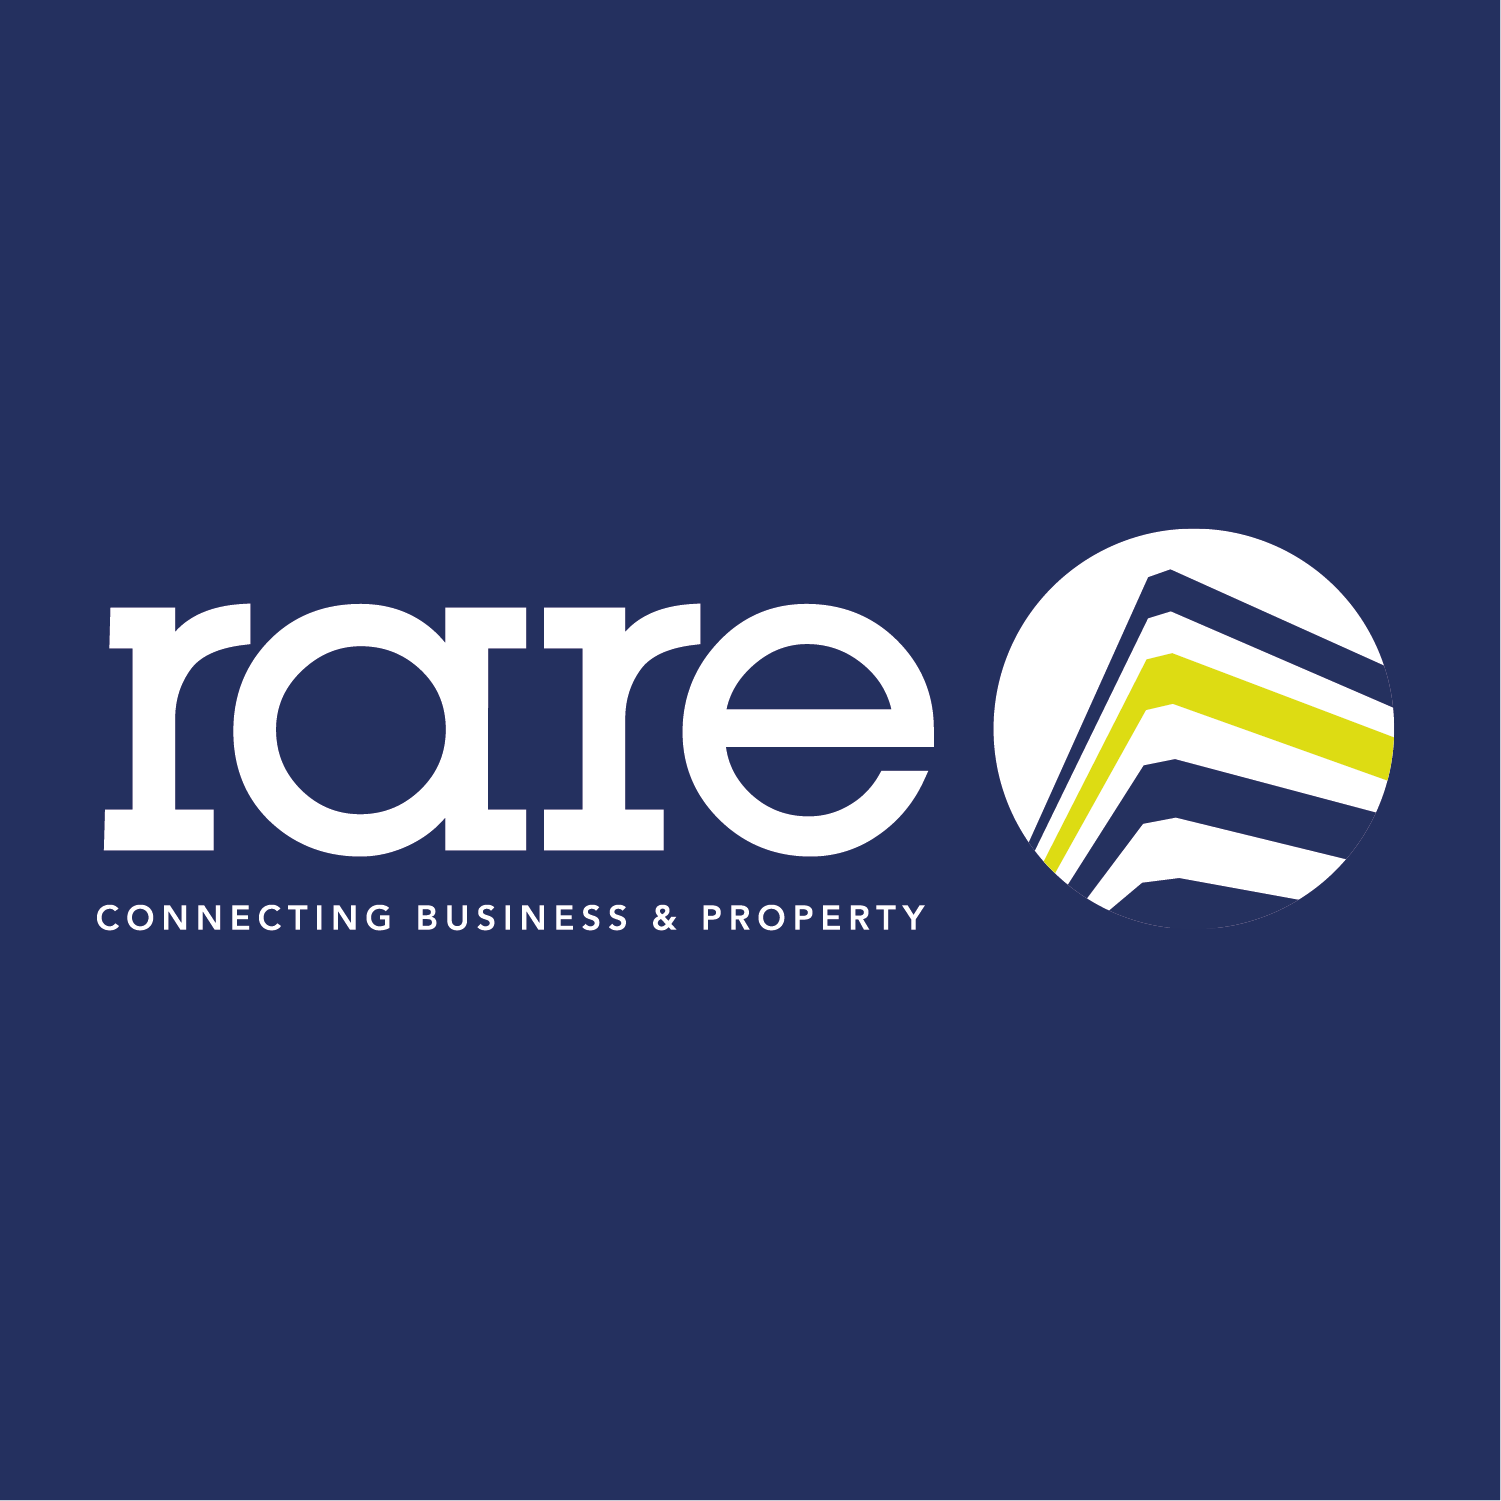 rare. Connecting business and property.